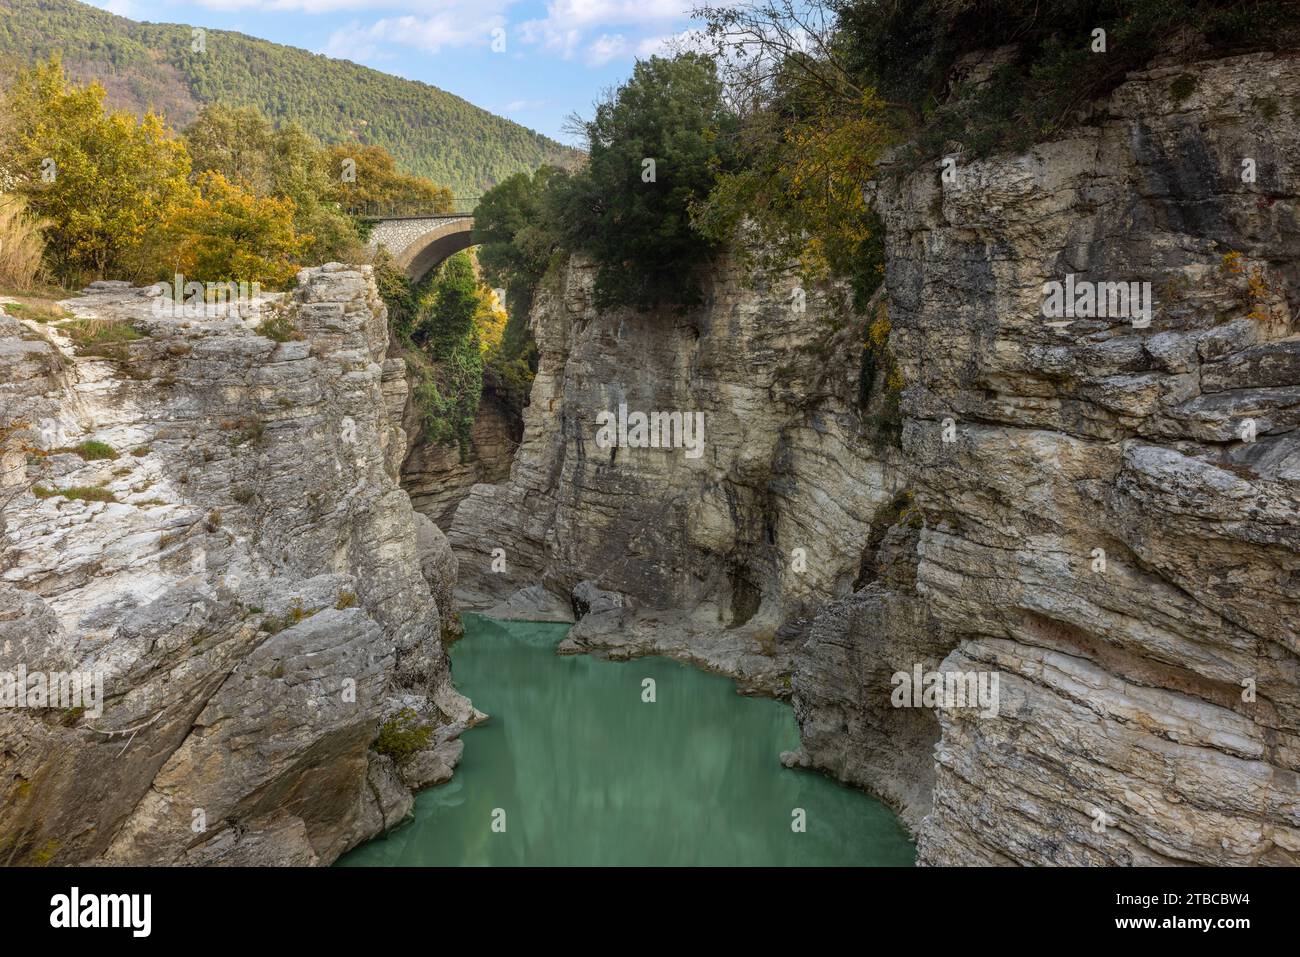 Marmitte dei Giganti, a natural canyon carved by the Metauro River in Fossombrone, Marche, Italy. Stock Photo